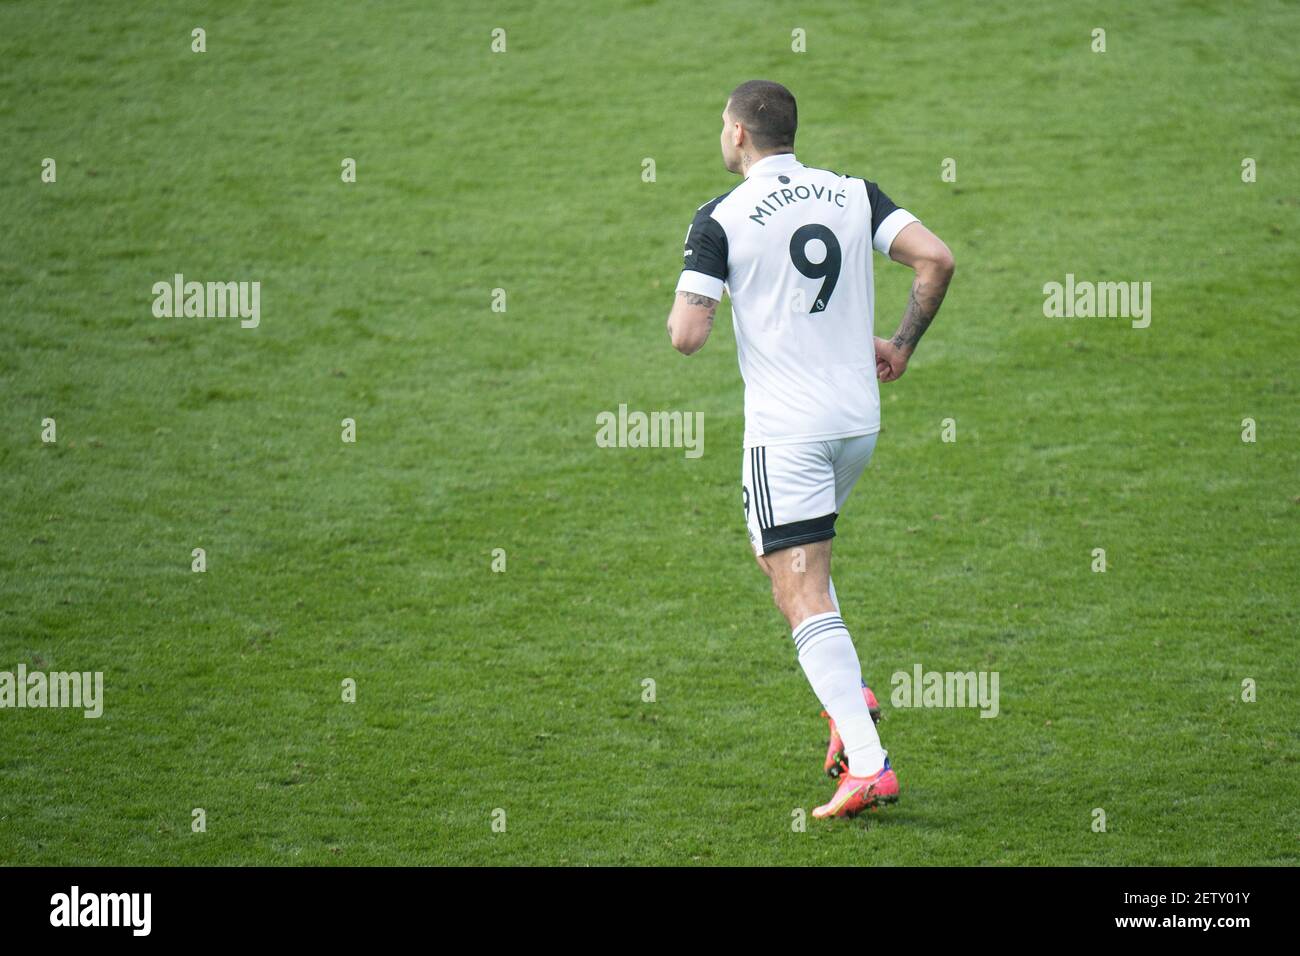 LONDON, ENGLAND - FEBRUARY 28: Aleksandar Mitrović of Fulham during the Premier League match between Crystal Palace and Fulham at Selhurst Park on Feb Stock Photo